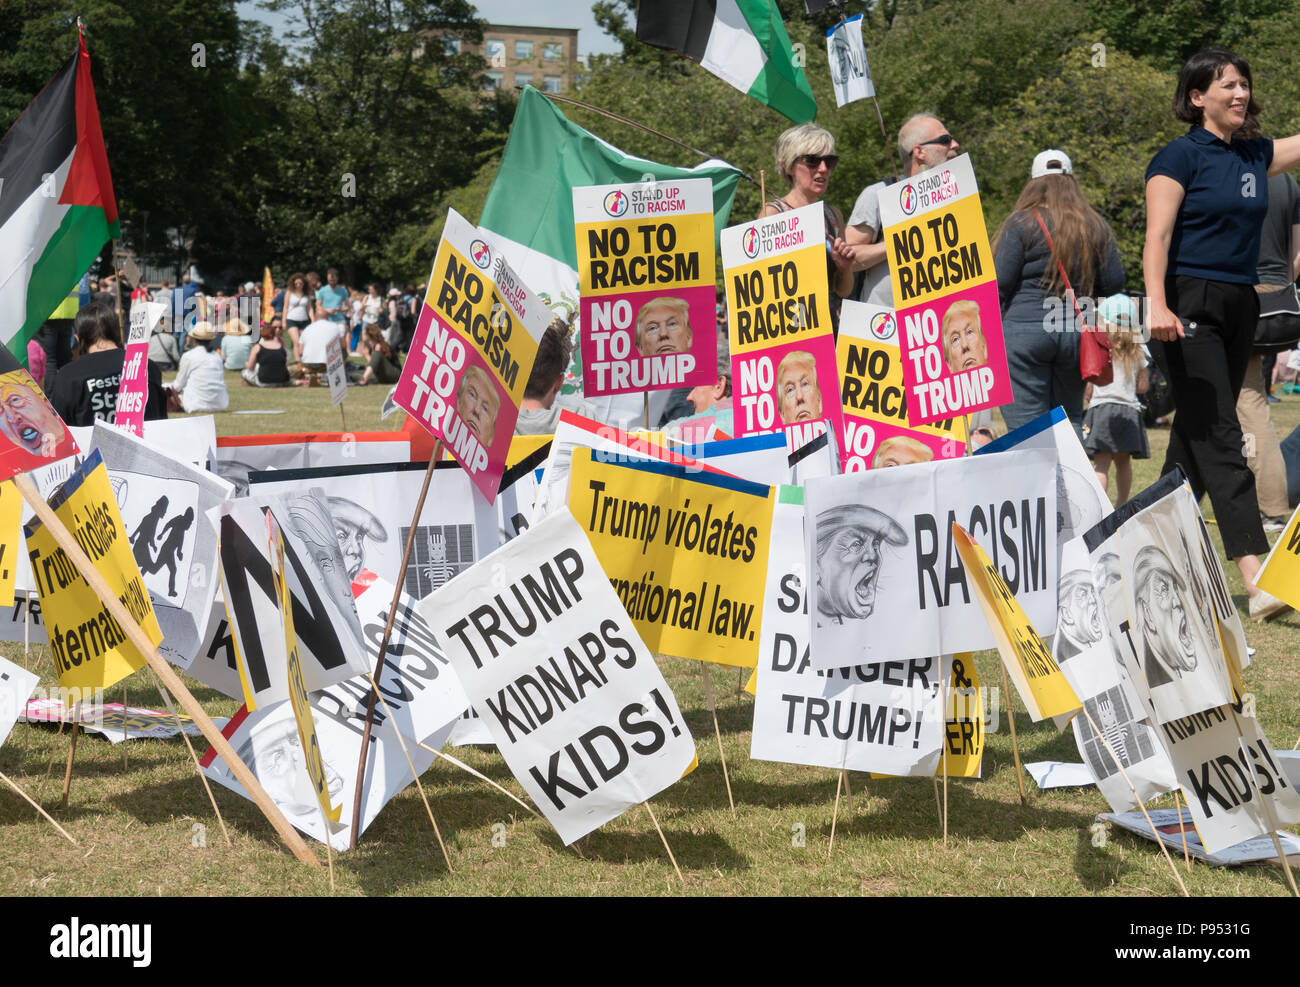 Scotland, UK. 14th July 2018. Anti Donald Trump 'festival of resistence' showing banners protesting USA president DonaldTrump's policies, also some flags. Taken at The Meadows in Edinburgh, Scotland, United Kingdom. Credit: Dallas Carter/Alamy Live News Stock Photo